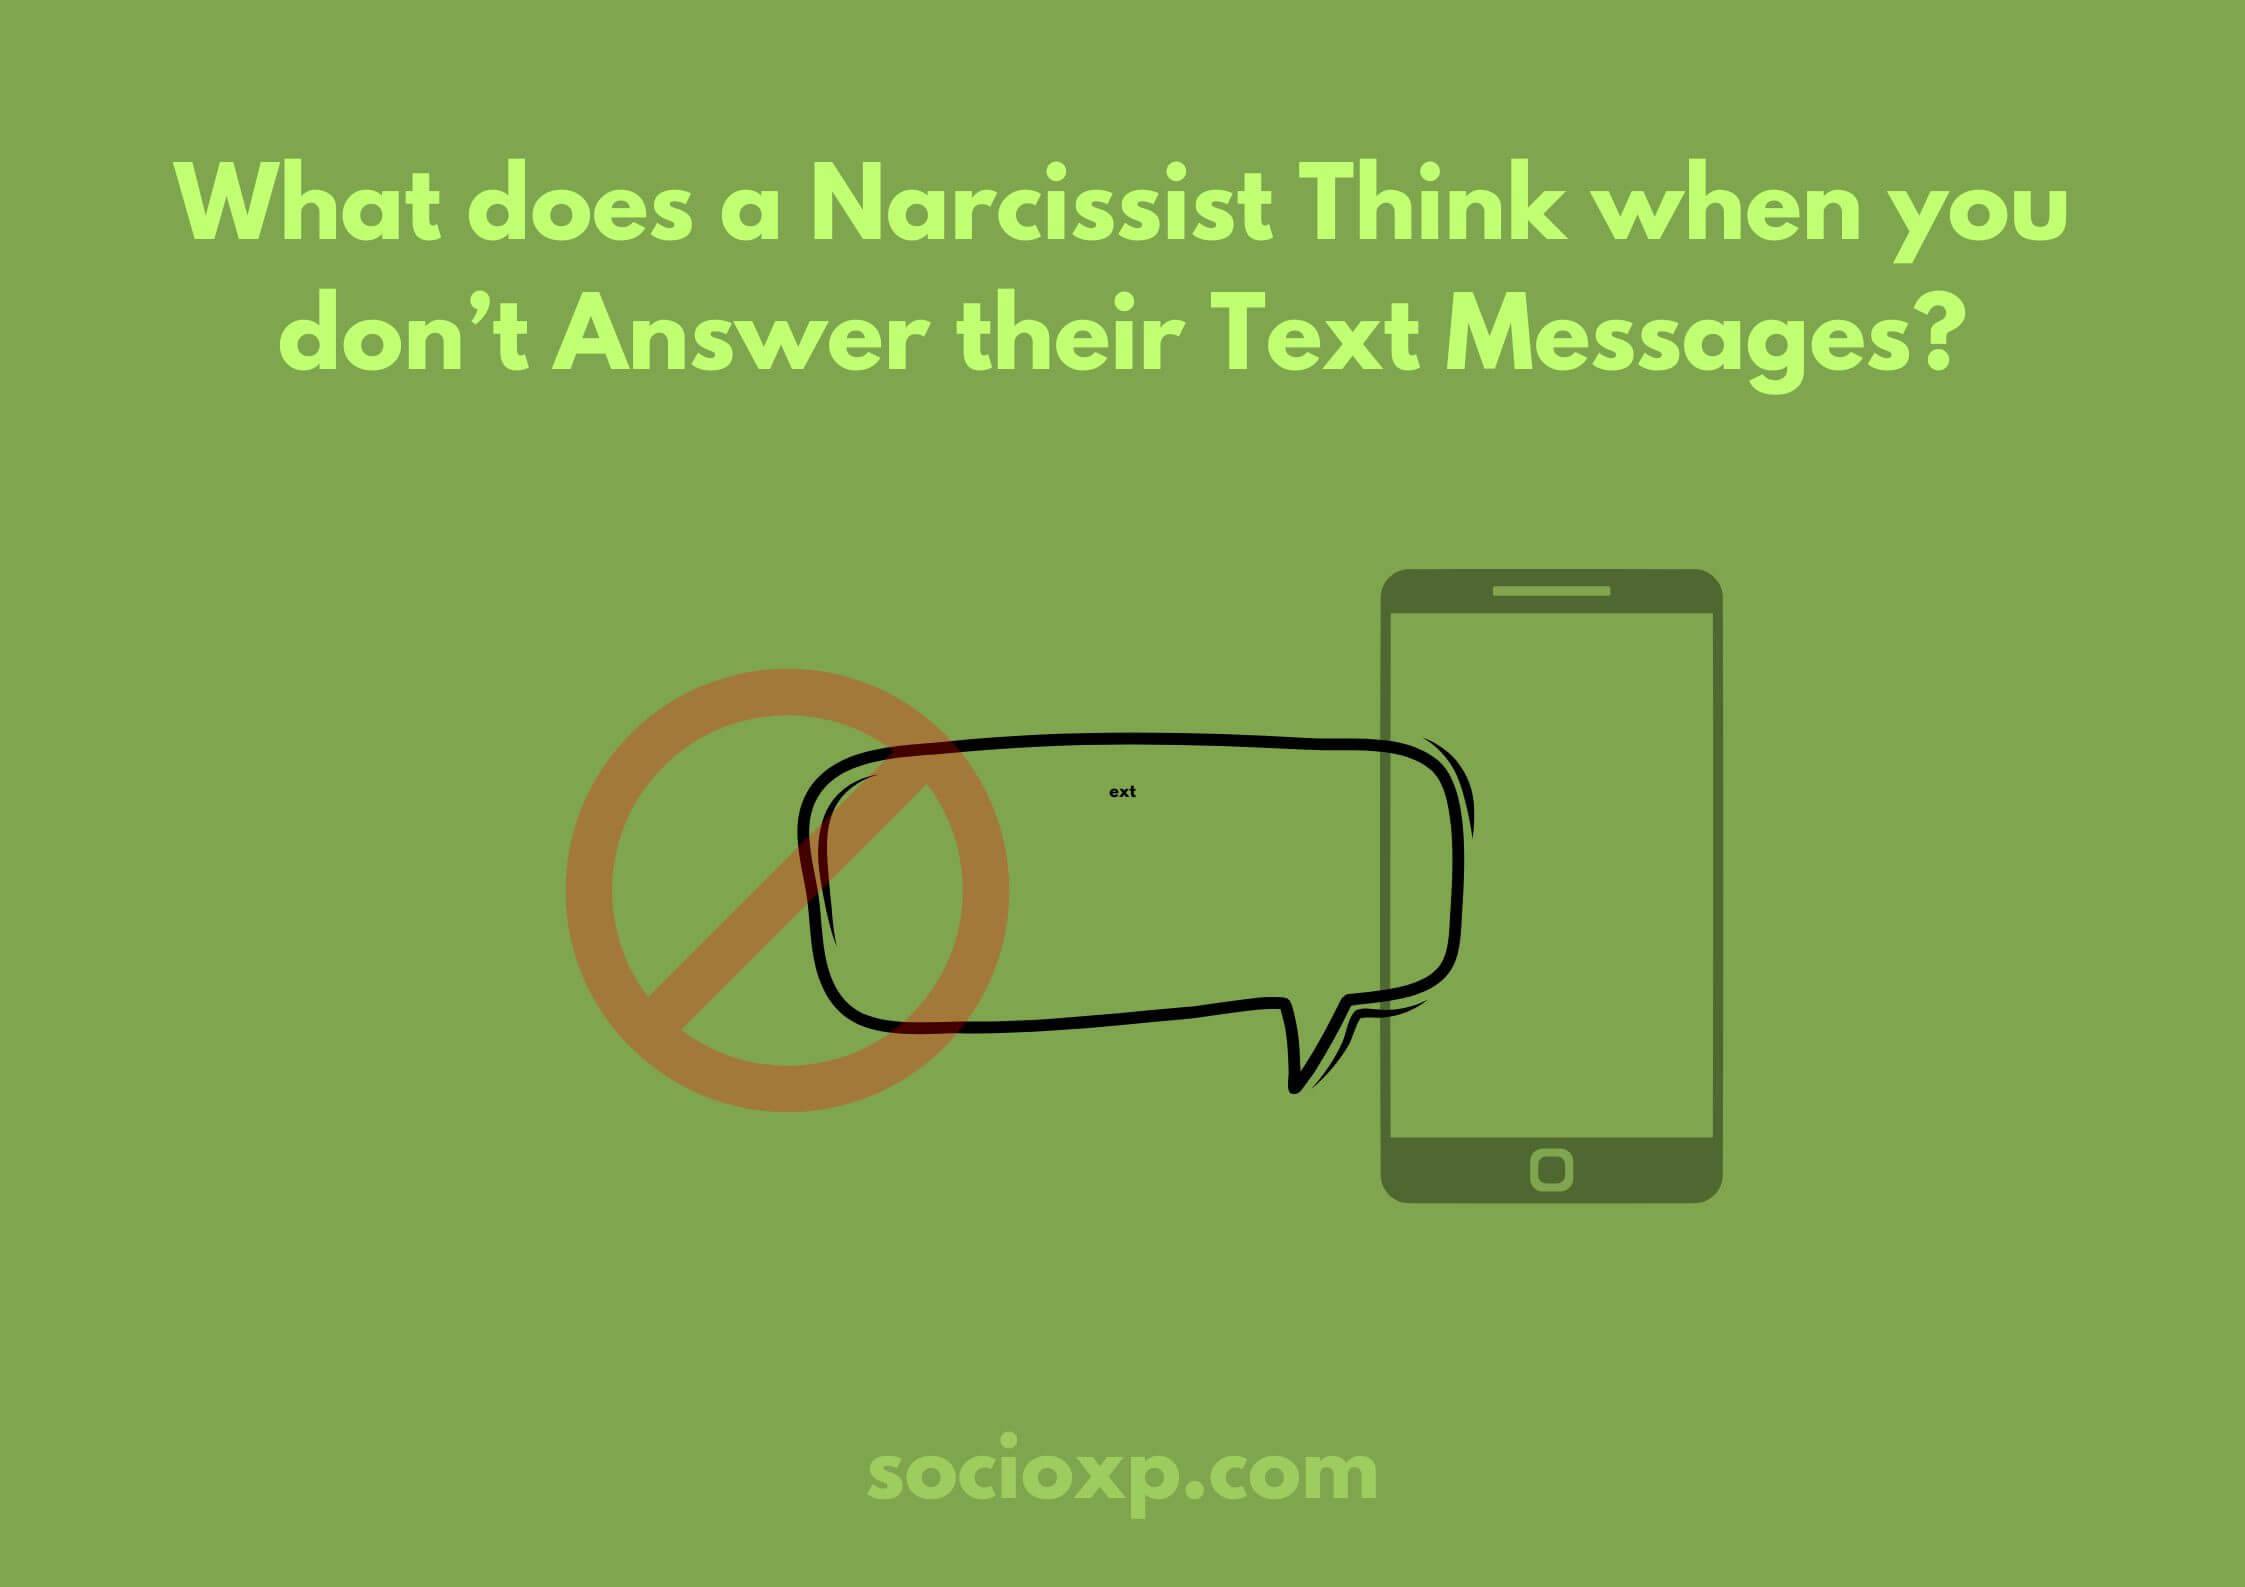 What Does A Narcissist Think When You Do not Answer Their Text Messages?